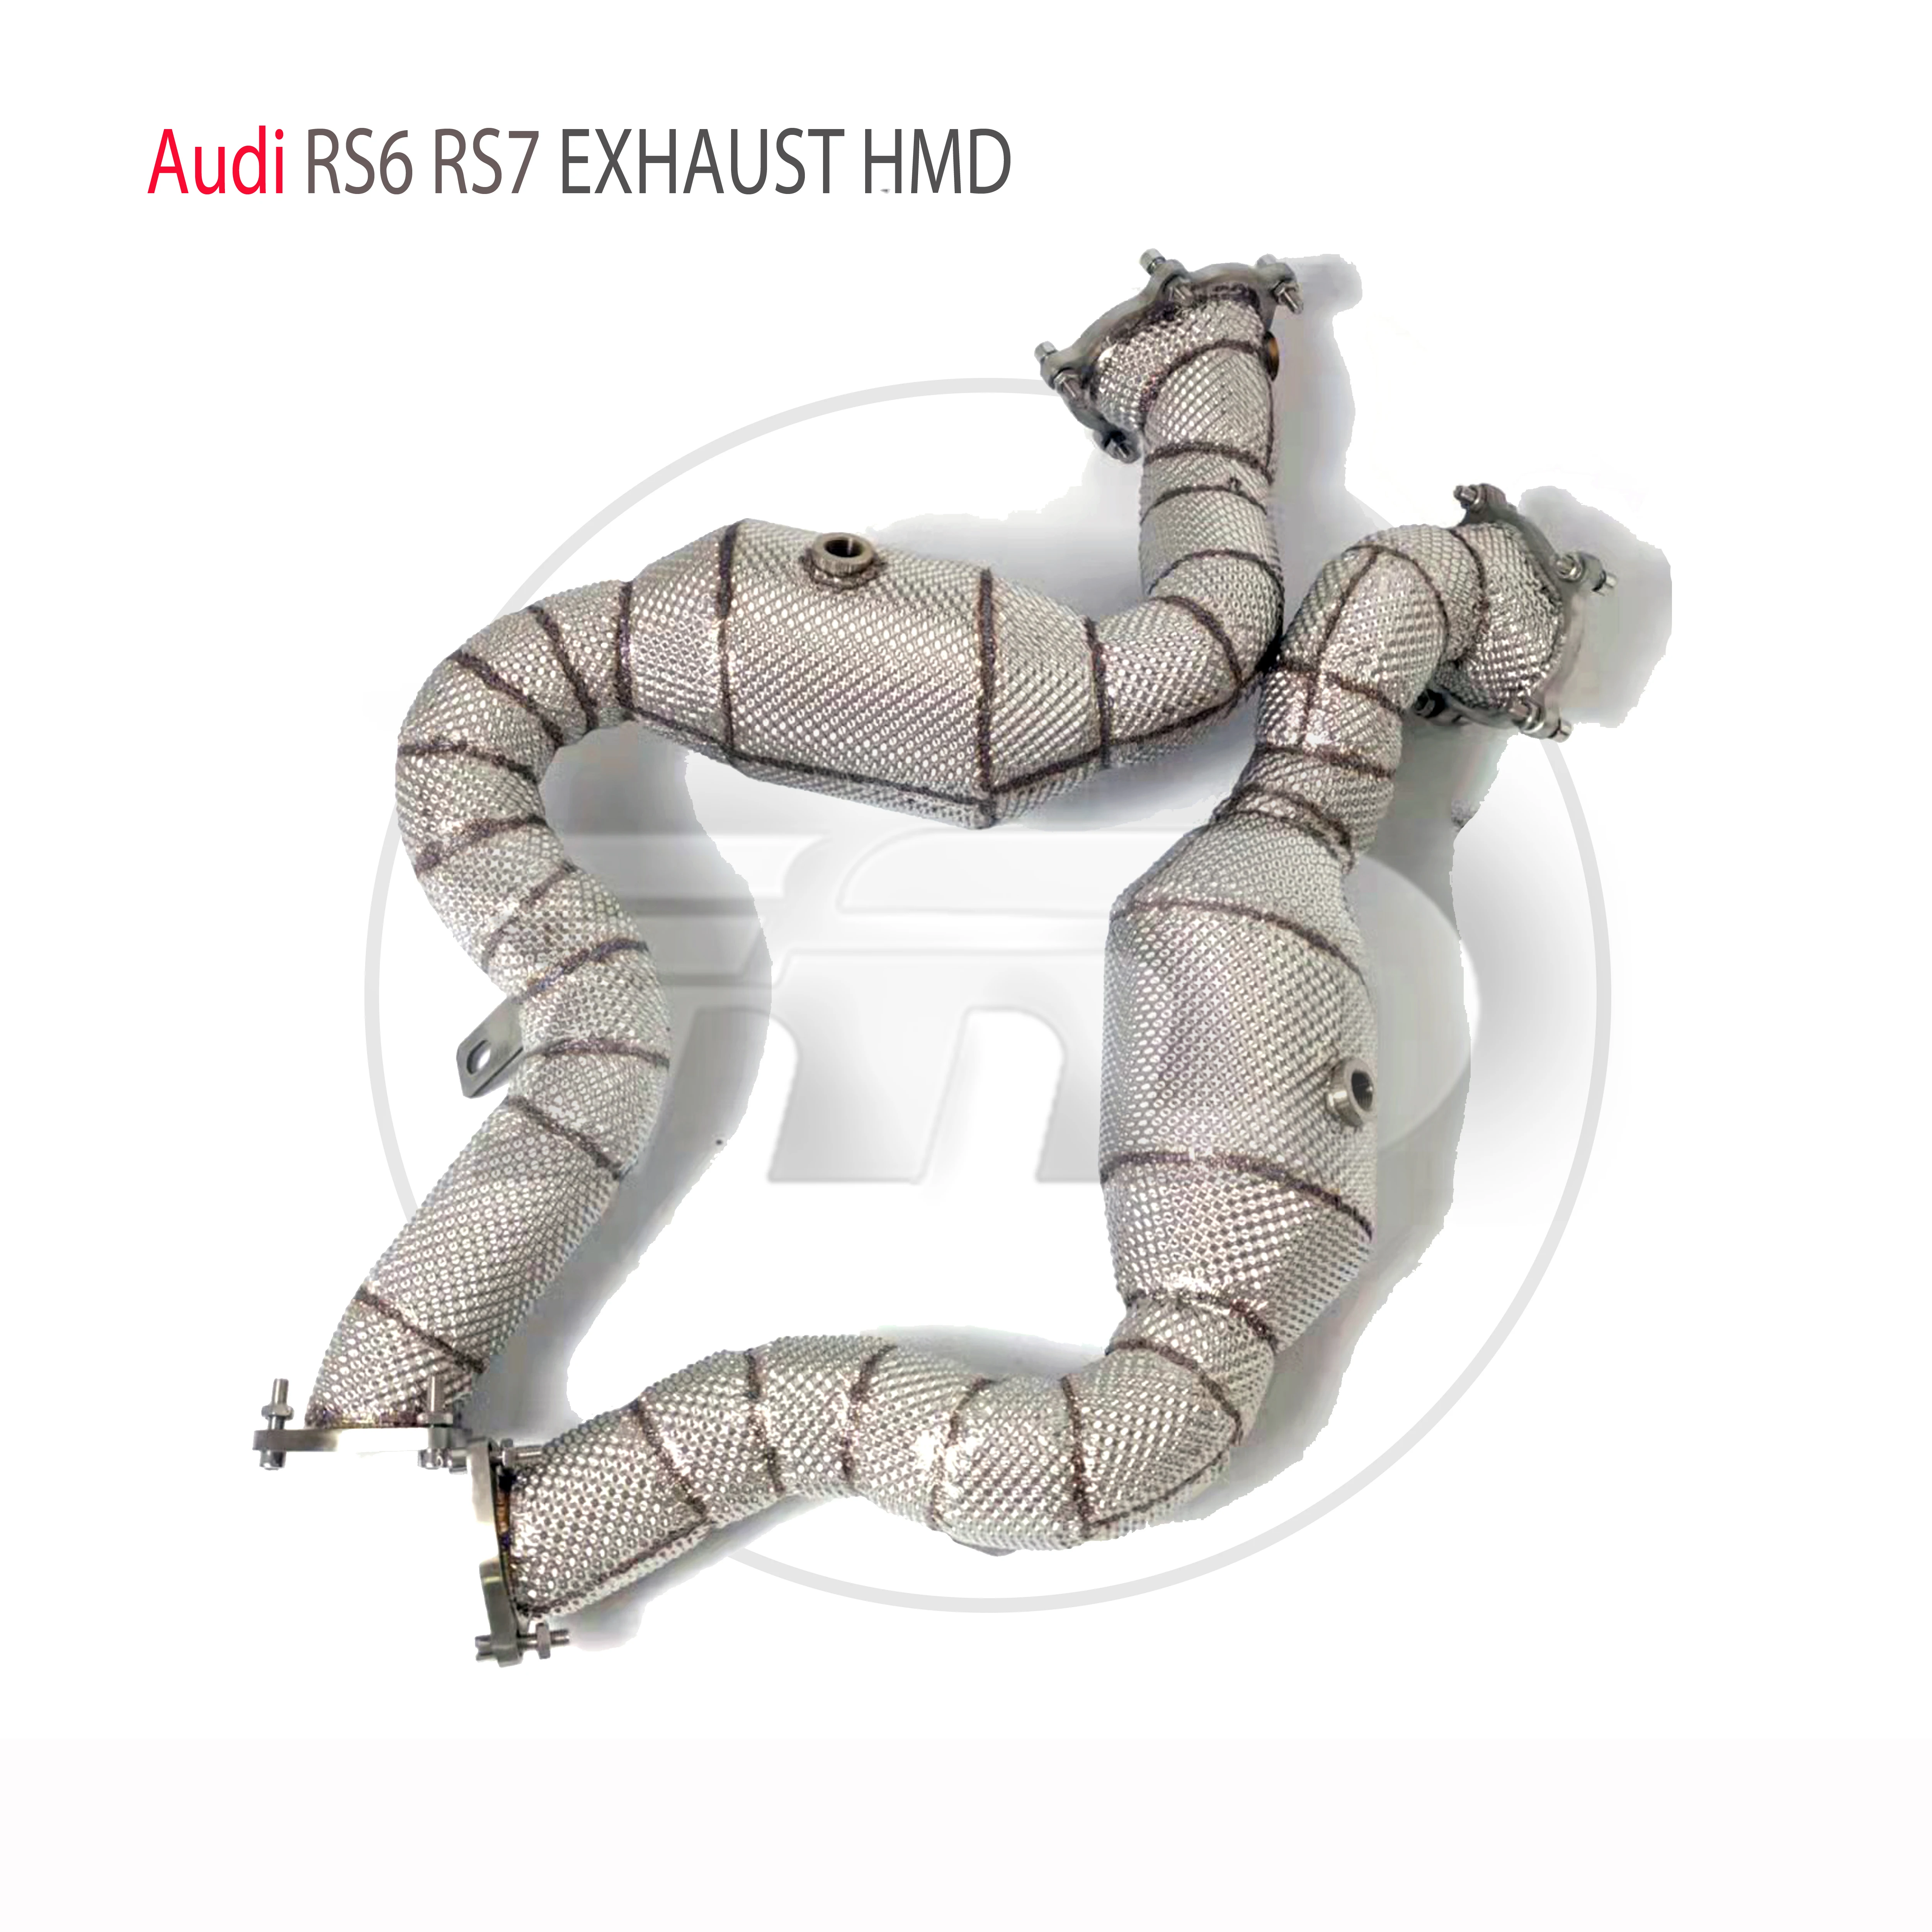 

HMD Exhaust Manifold High Flow Downpipe for Audi RS6 RS7 C7 4.0T Car Accessories With Catalytic Header Without Cat Catless Pipe